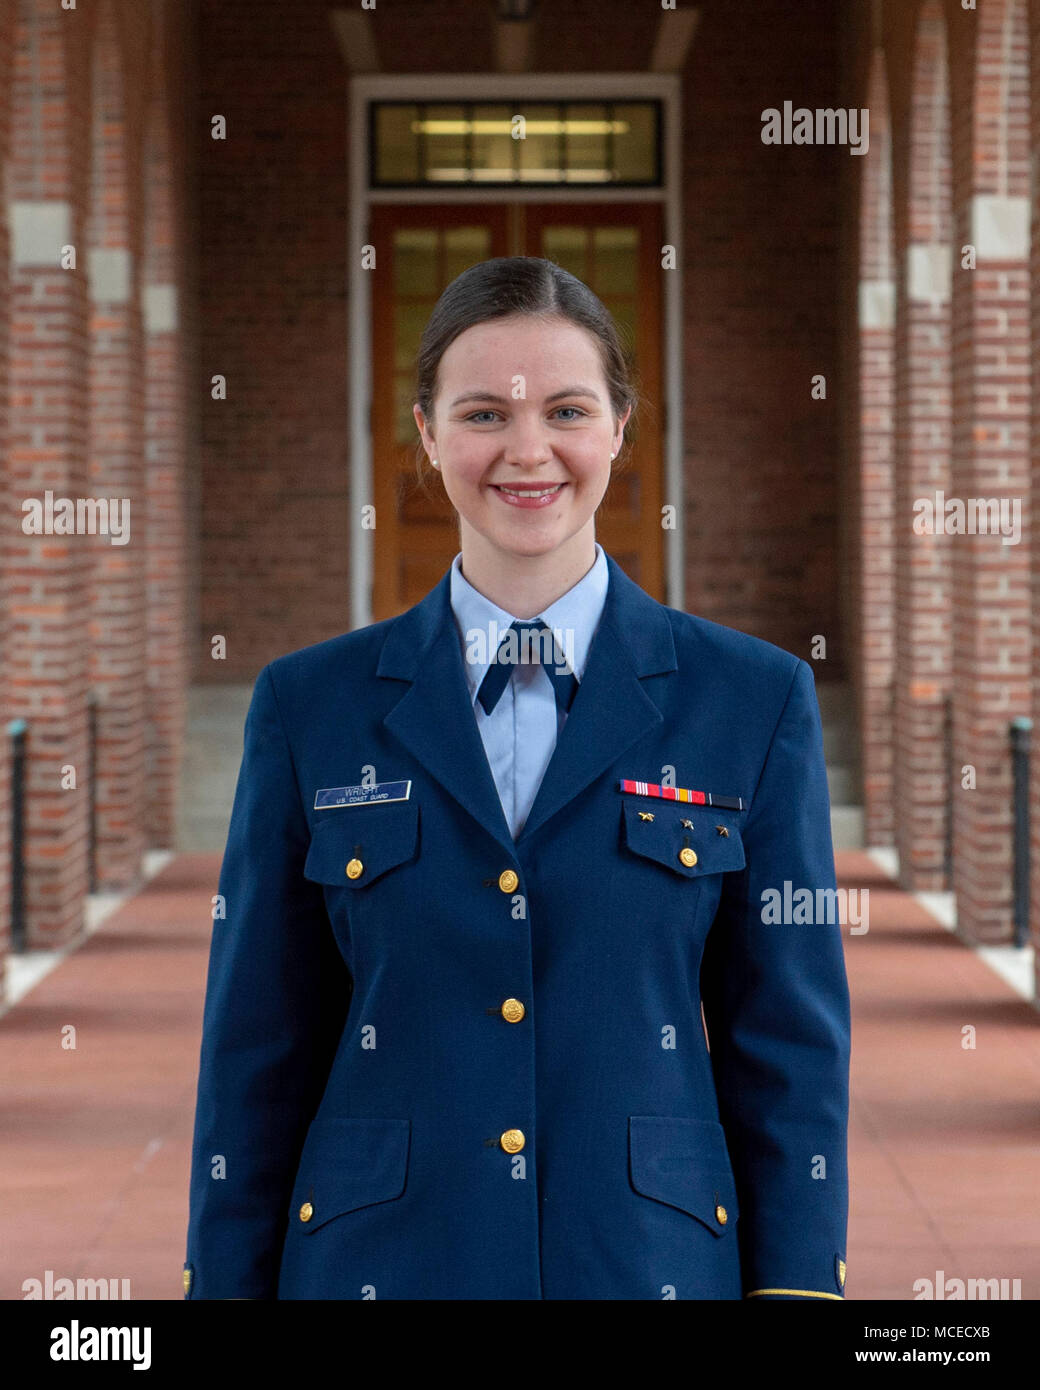 NEW LONDON, CONN. – Cadet First Class Erin Wright, a student at the U.S. Coast Guard Academy, has been awarded a 2018-2019 Fulbright scholarship to pursue a Master of Philosophy degree in Energy Engineering at Newcastle University, Newcastle, U.K.     The Fulbright U.S. Student Program offers research, study and teaching opportunities in over 140 countries to graduate students.  The program aims to increase mutual understanding between the people of the United States and the people of other countries.     U.S. Coast Guard photos by Petty Officer 2nd Class Lauren Laughlin Stock Photo